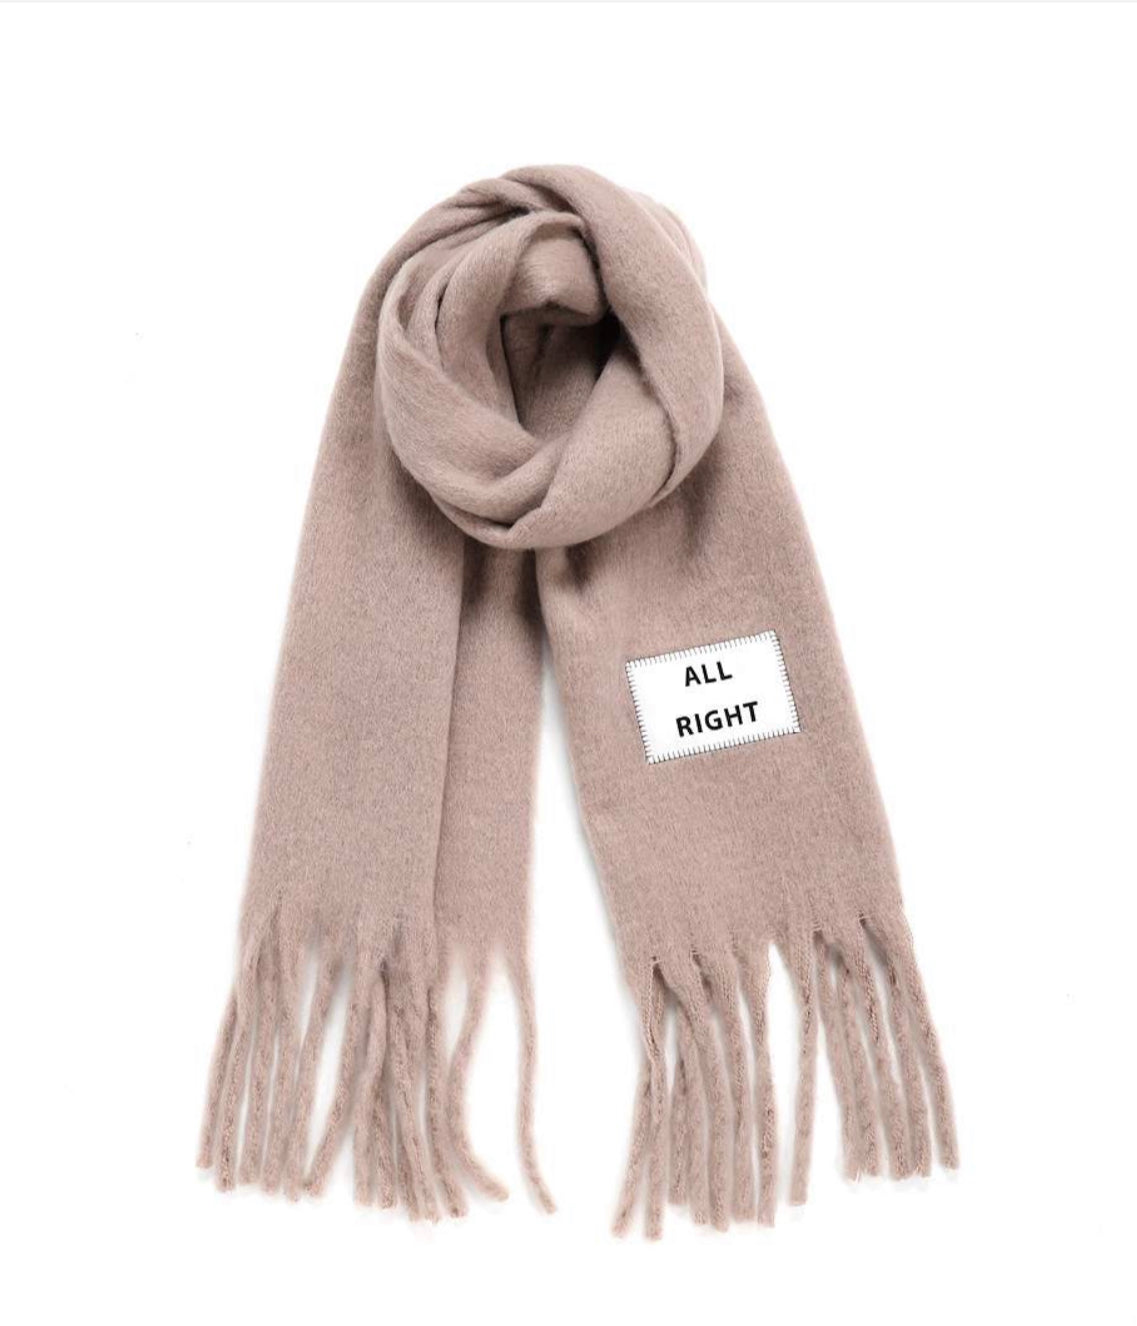 VERB TO DO SCARF -All Right